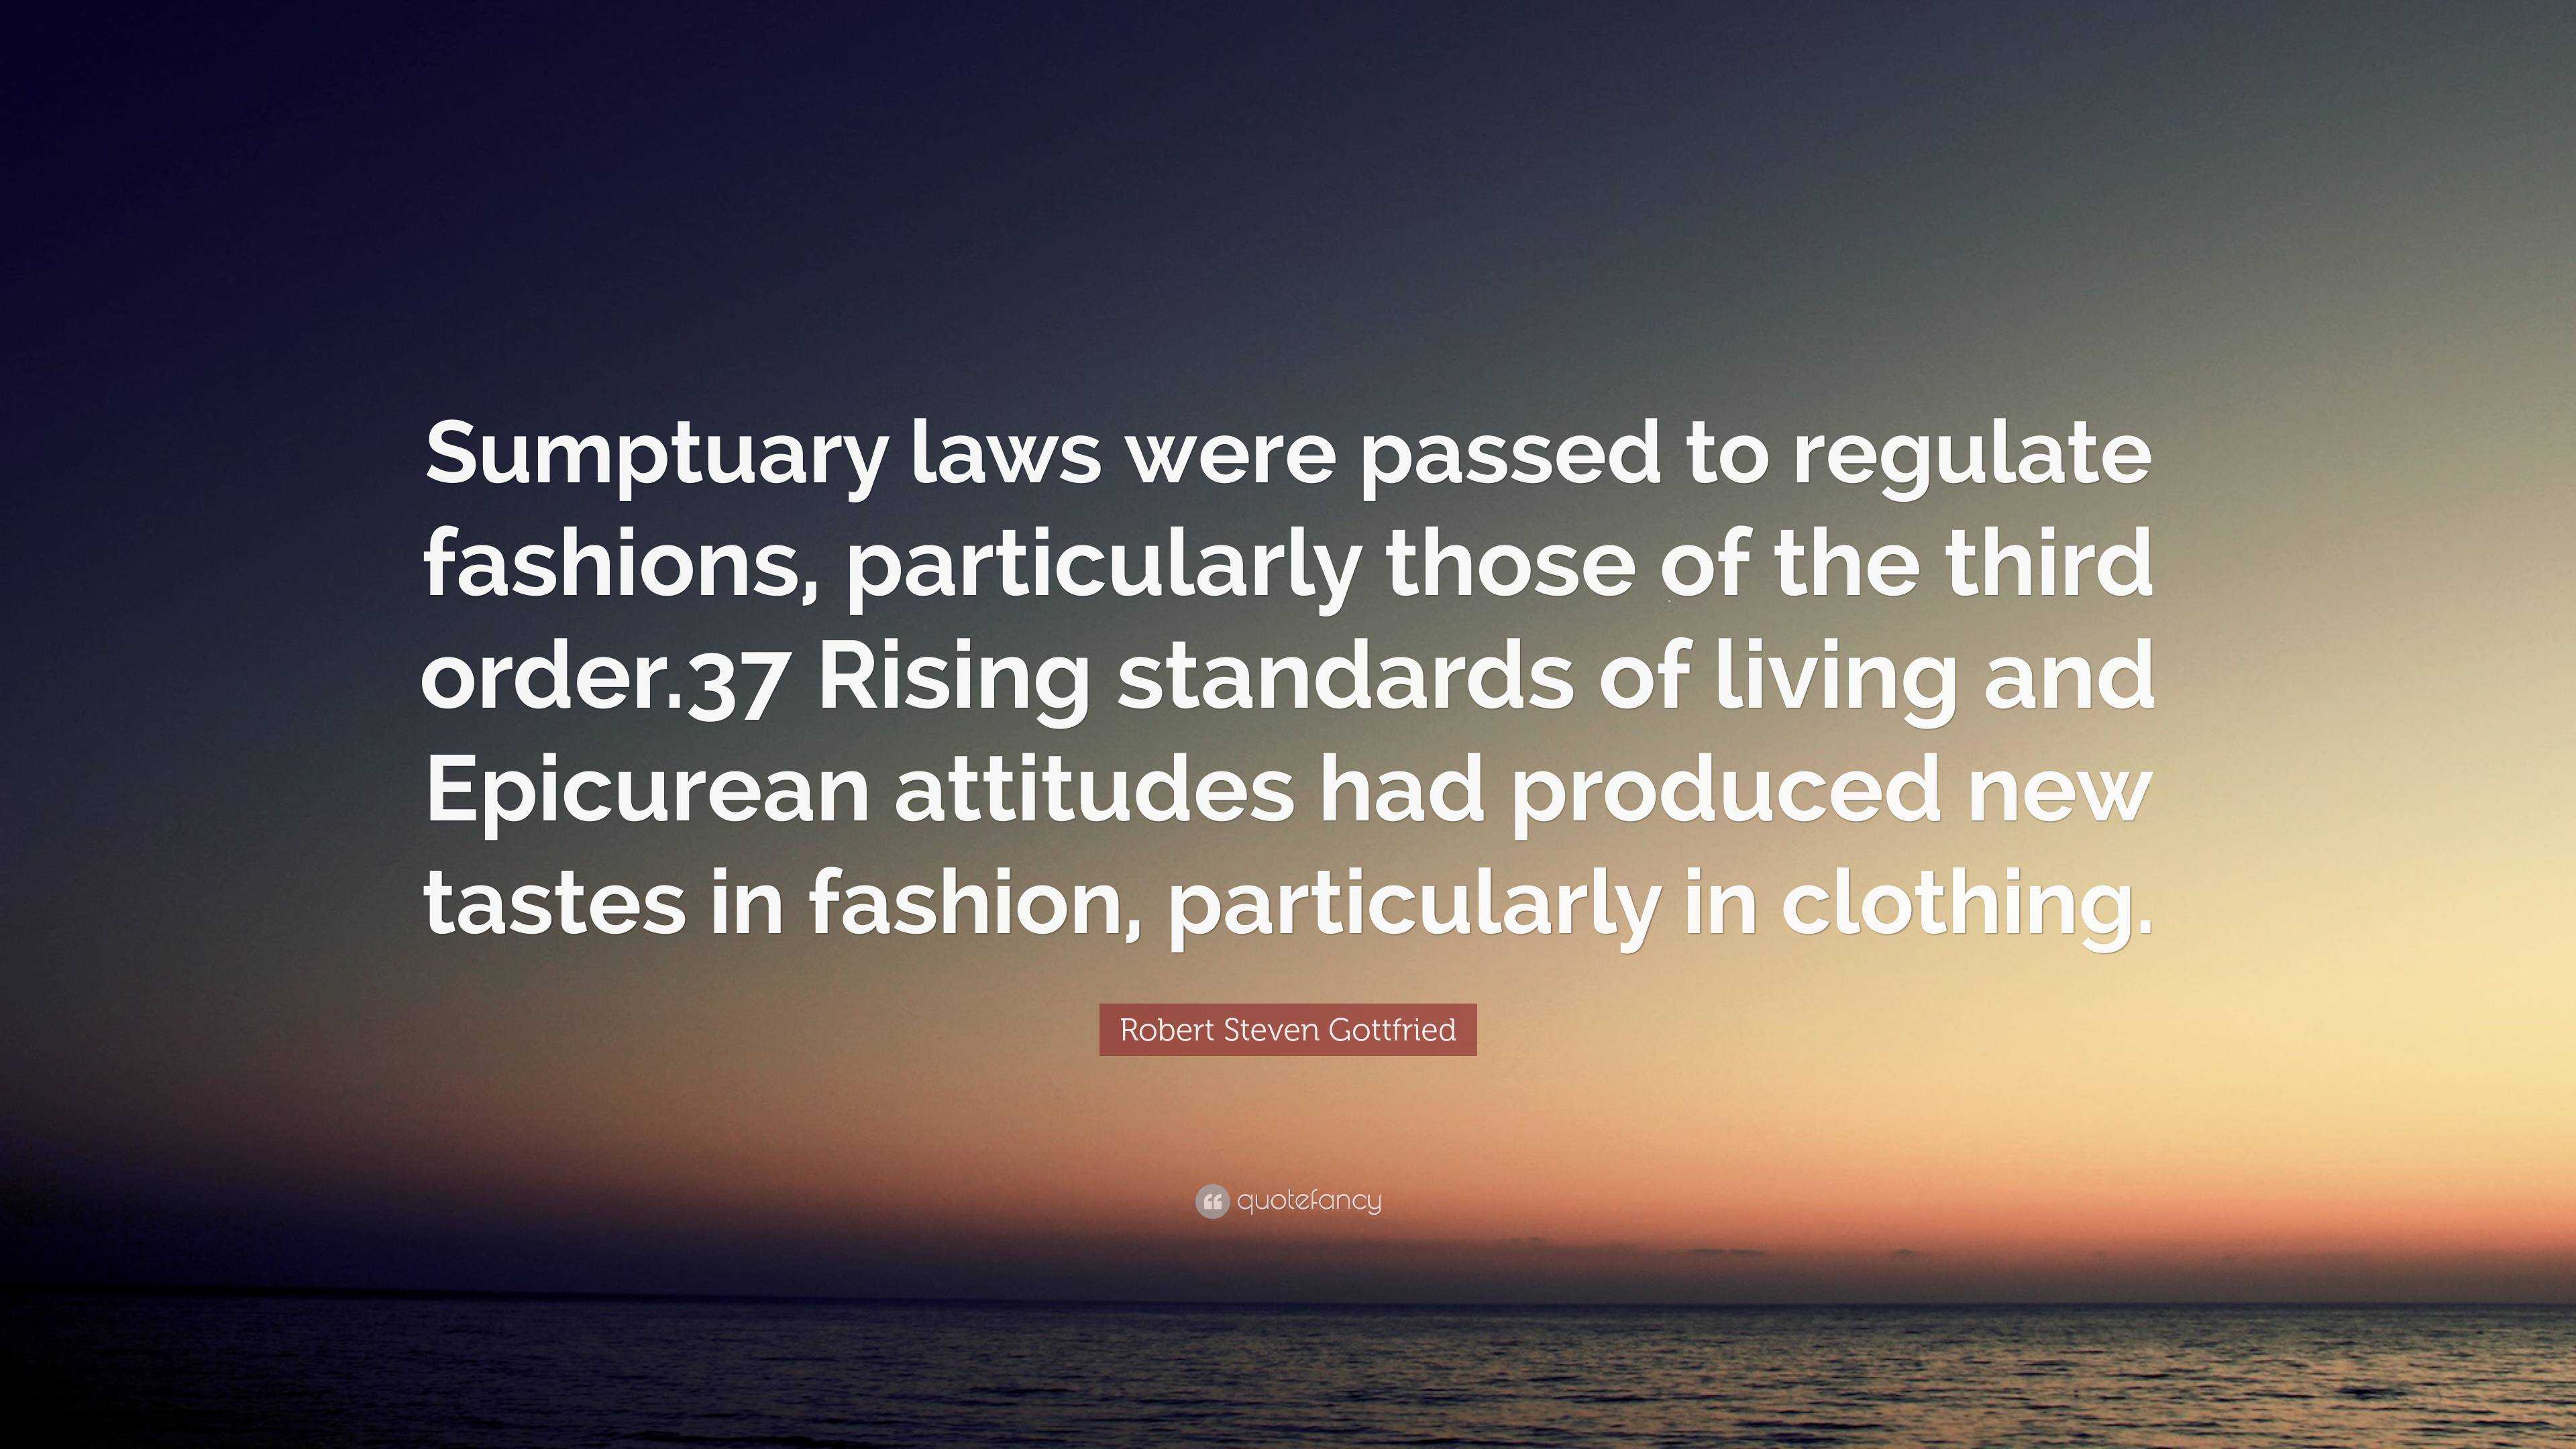 Robert Steven Gottfried Quote: “Sumptuary laws were passed to